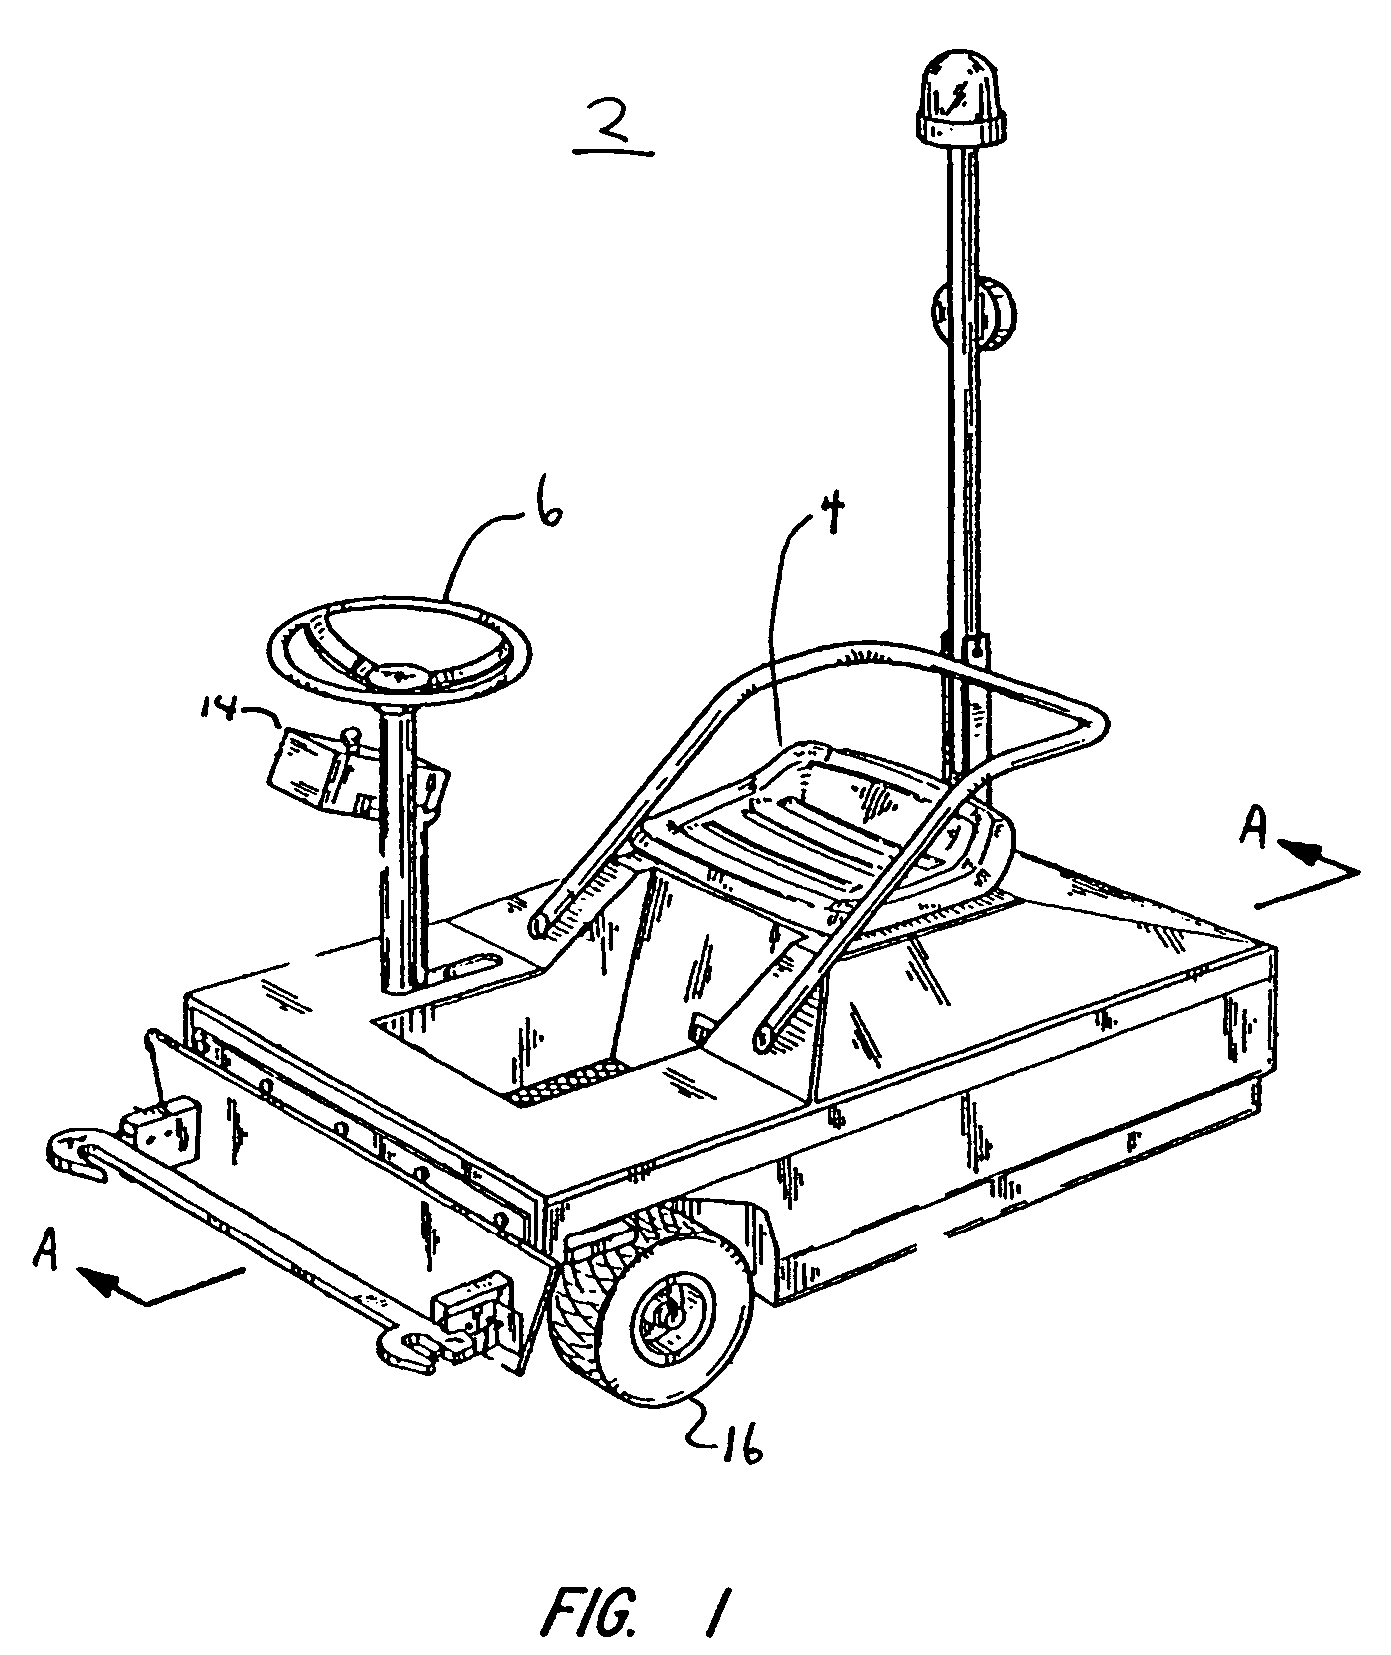 Power-assisted cart retriever with attenuated power output